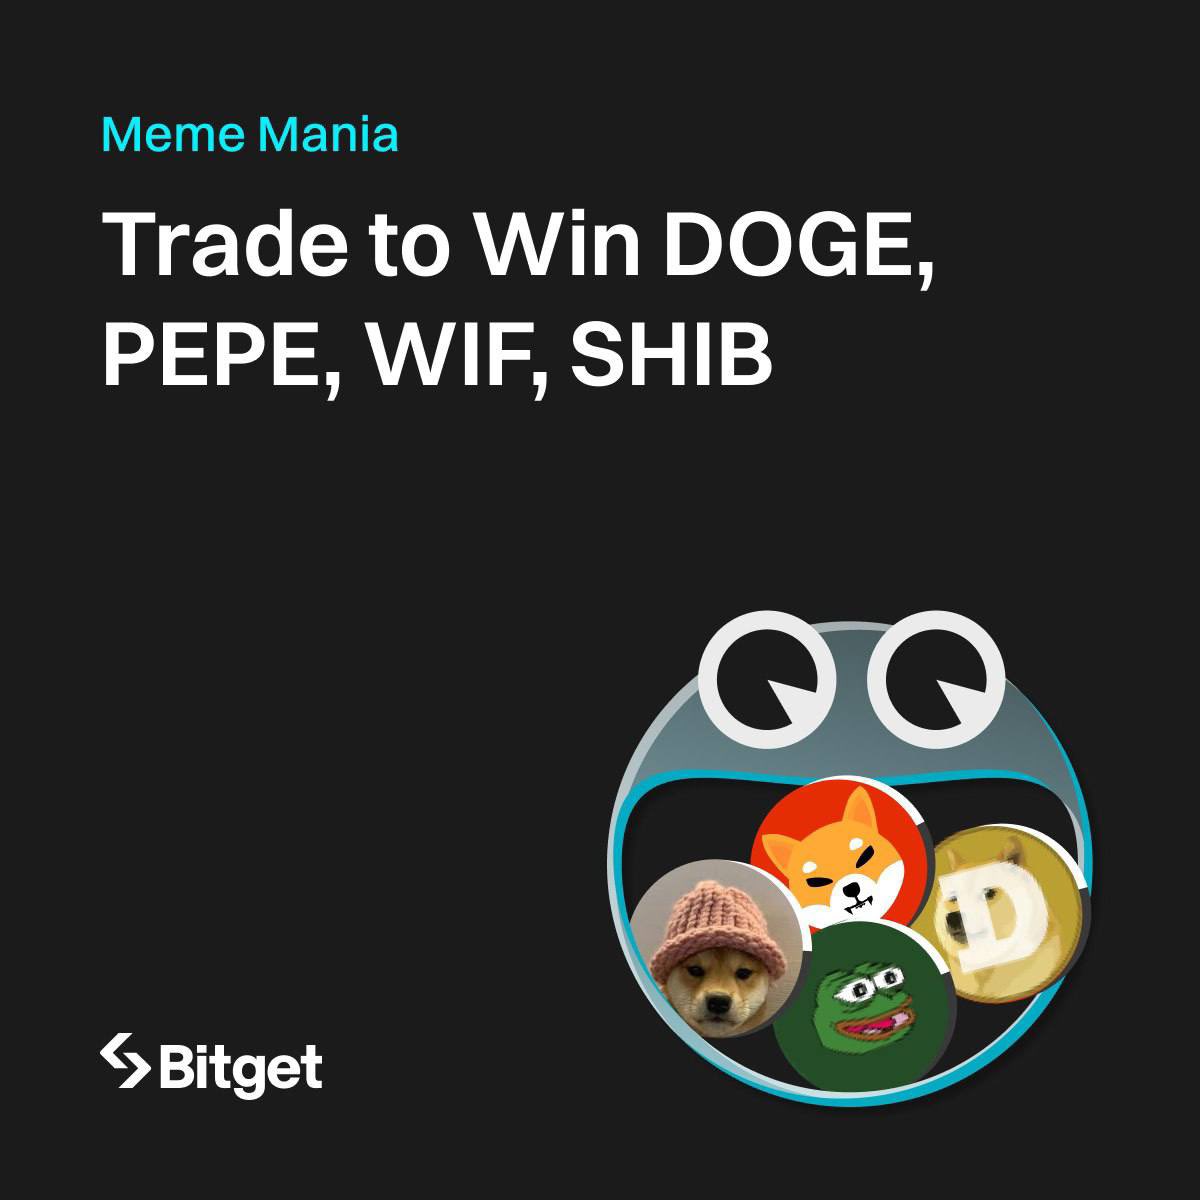 Finally meme season & guess what? $50,000 is up to be Won!! Bitget will airdrop users up to $10,000 in DOGE, PEPE, WIF & SHIB TOKENS! It’s your chance now ! First 5000 users to open a minimum trade of 2000 USDT will share 10000USDT Sign up via this link to win: